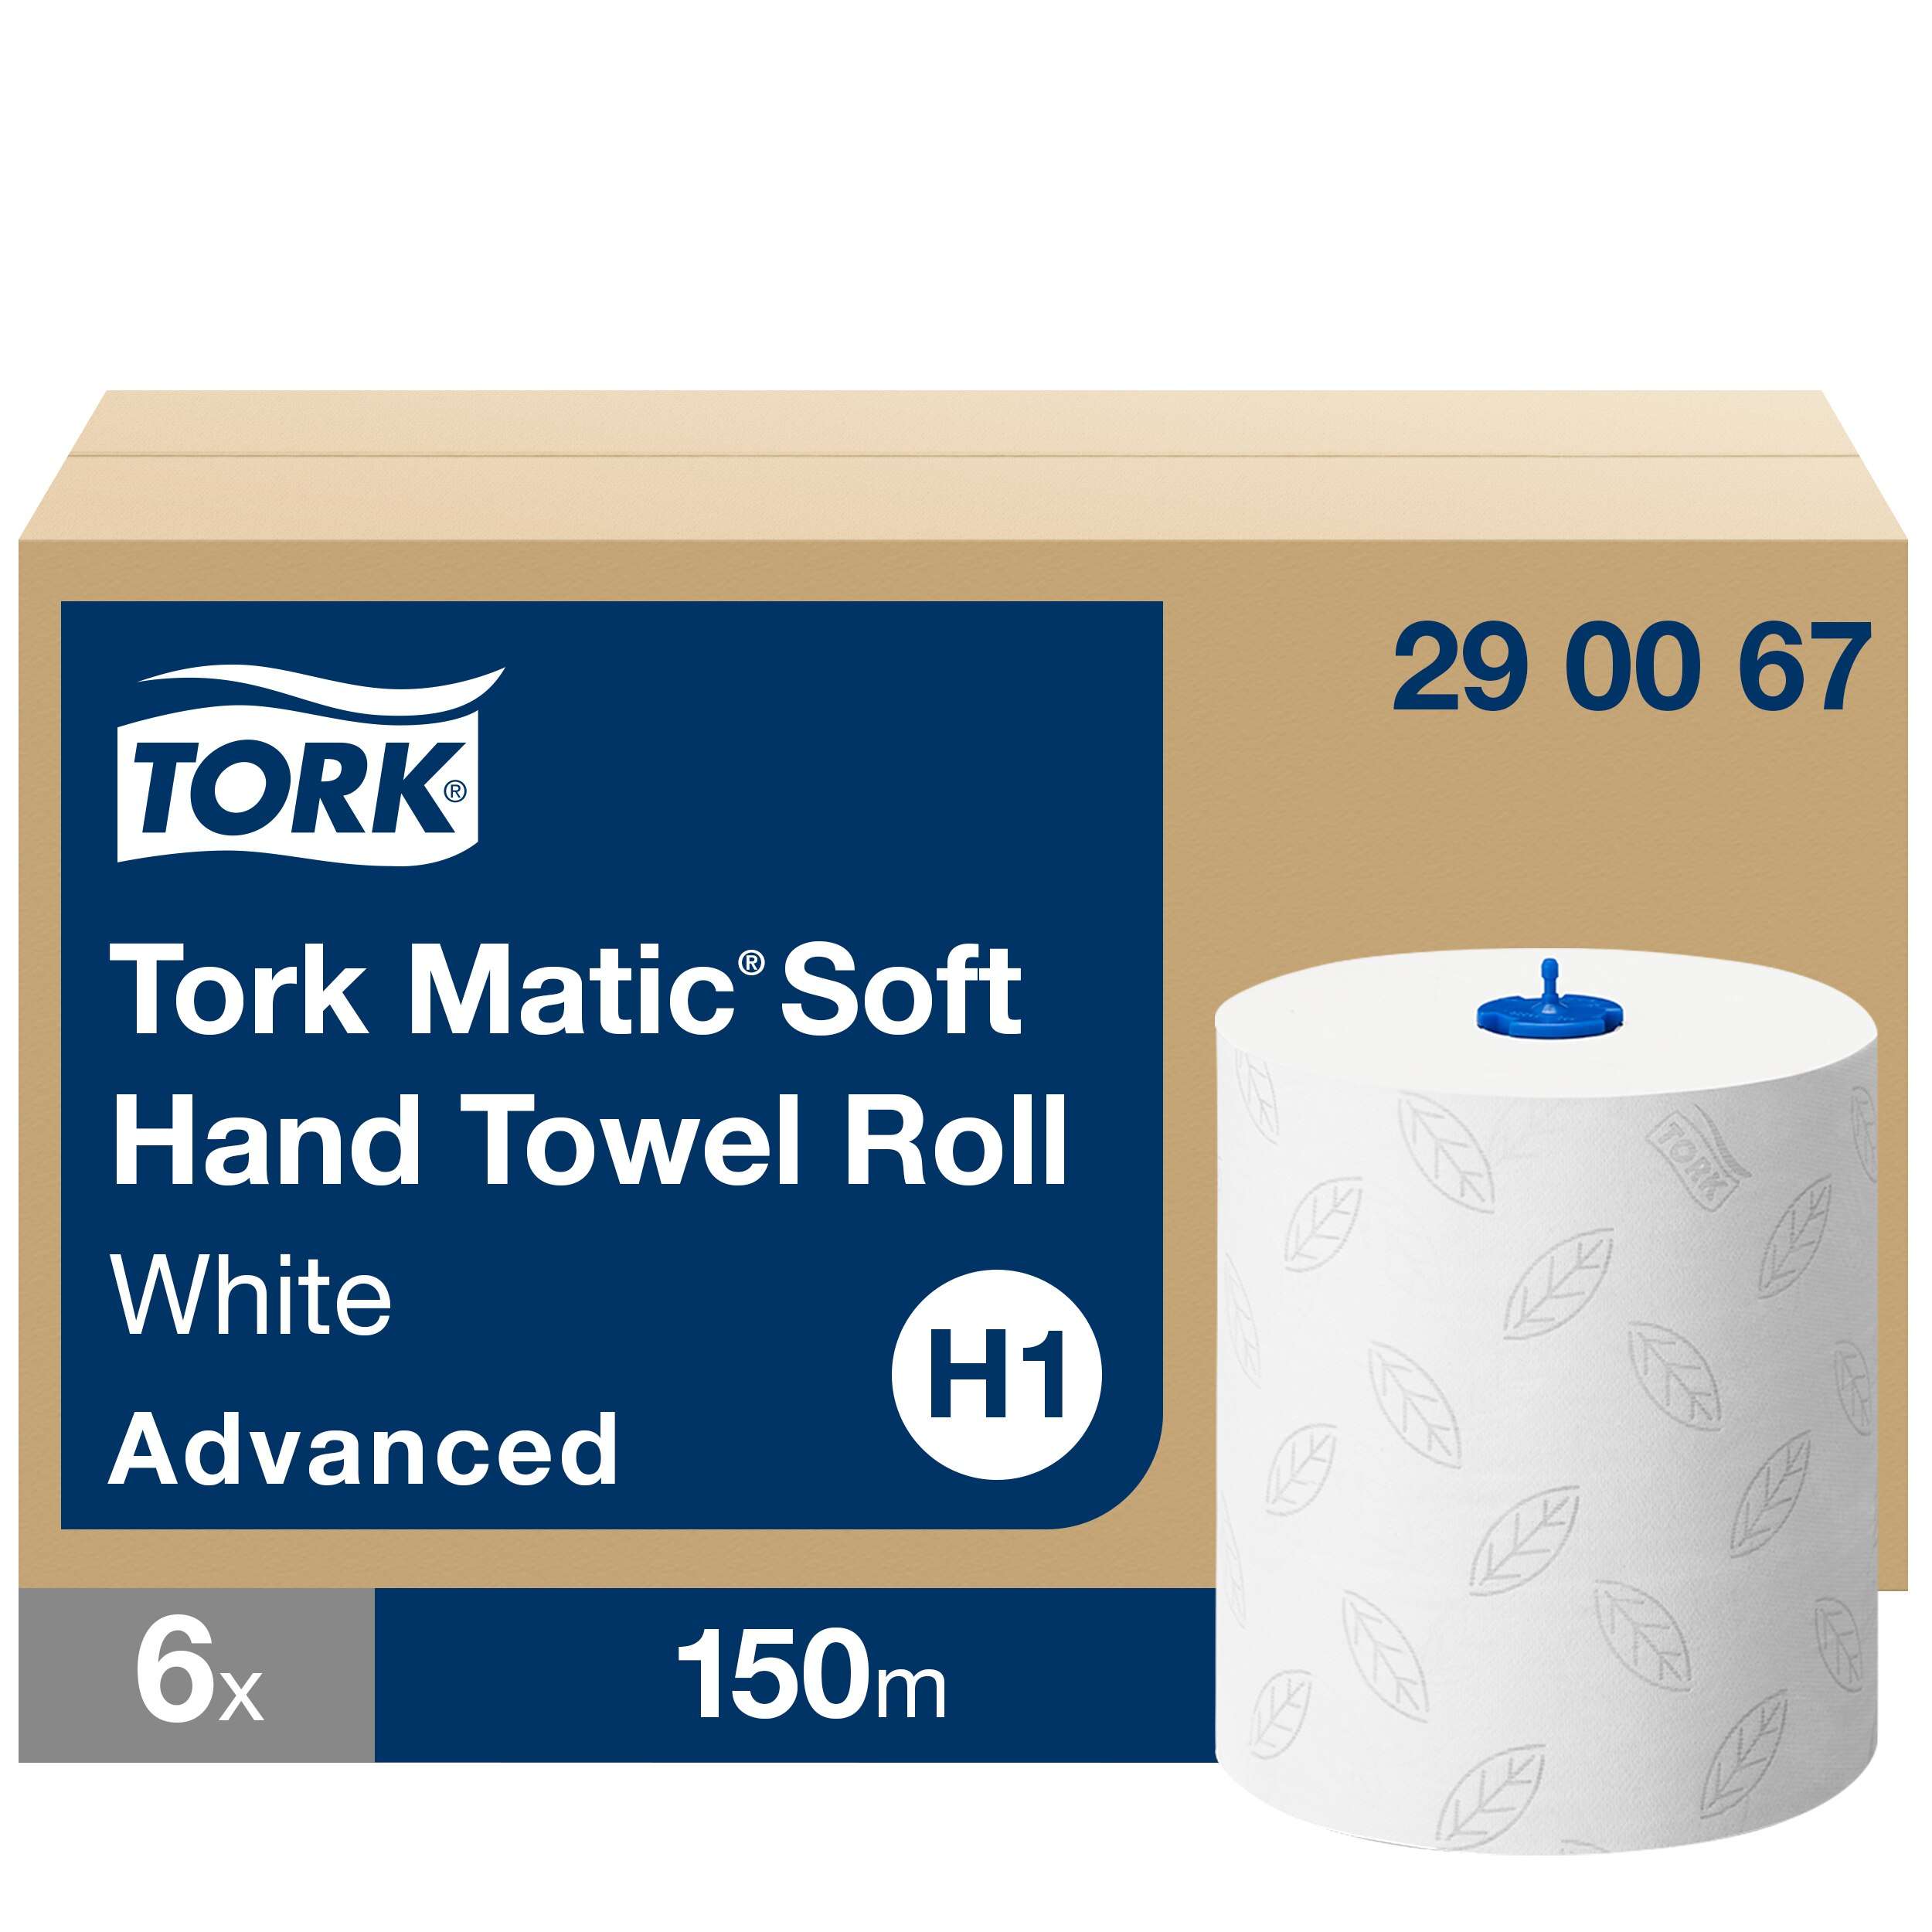 Tork Matic® Soft Paper Hand Towels White with Grey Leaf H1